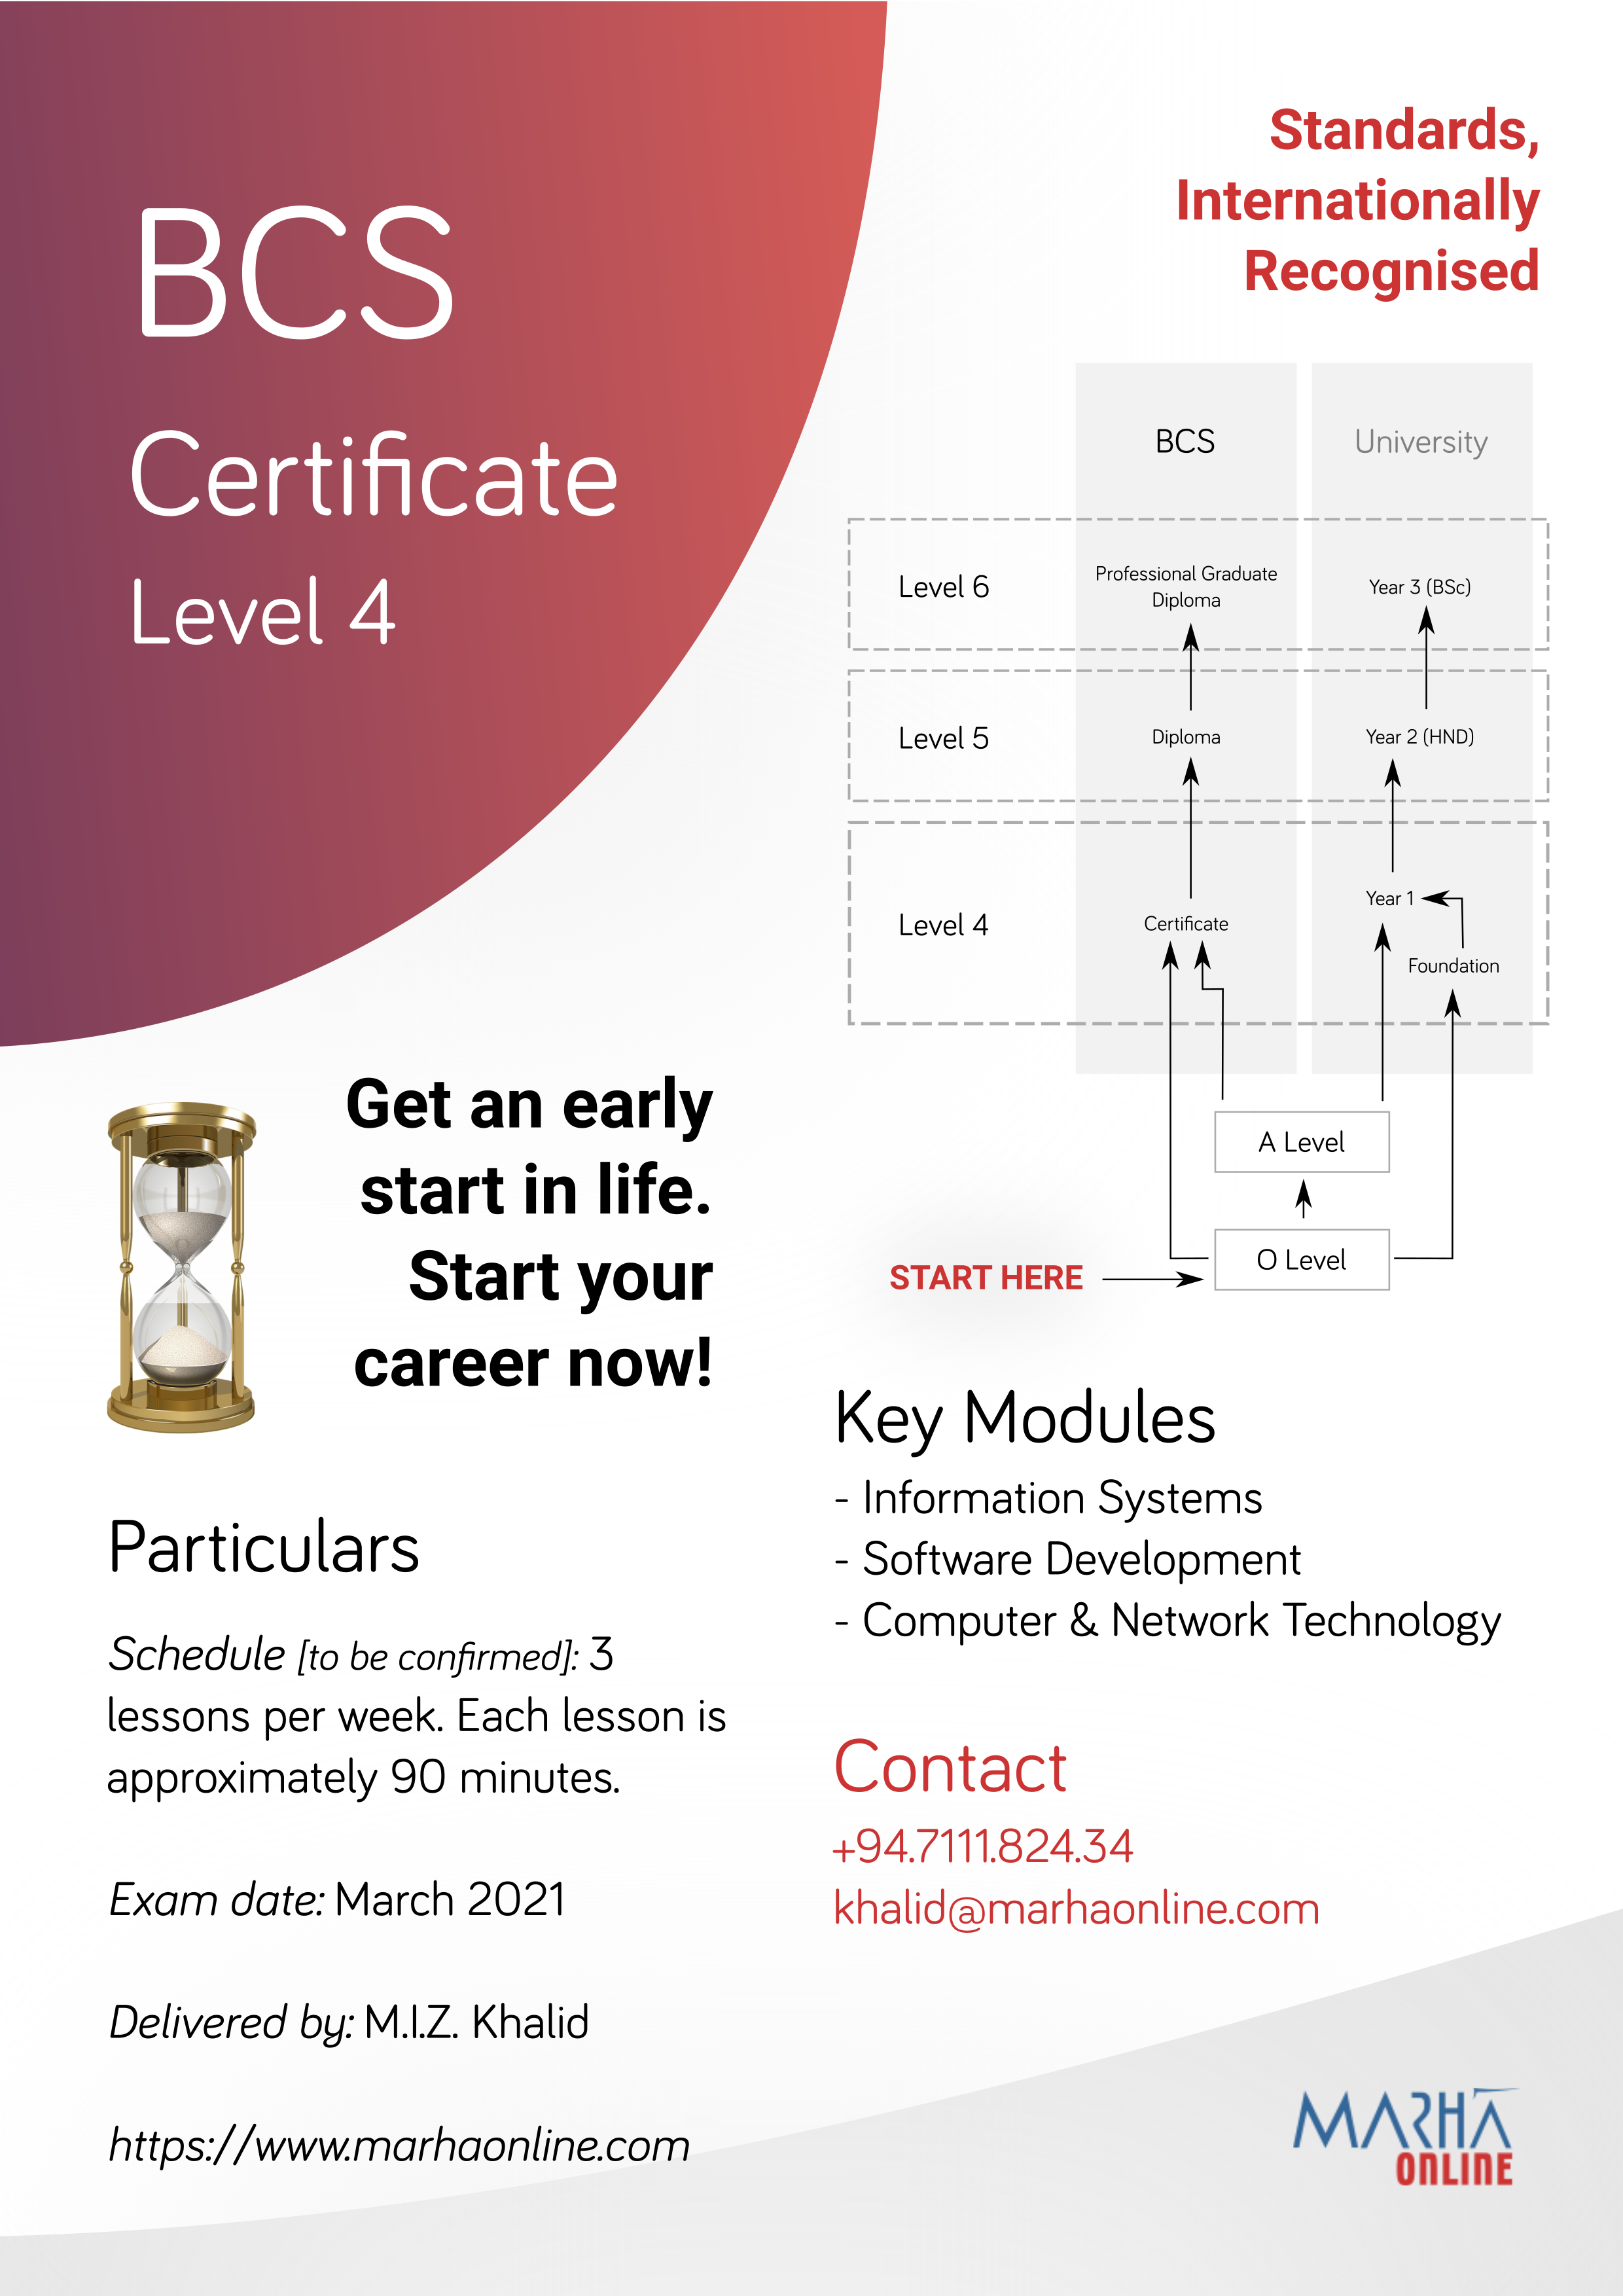 Get an early start in life. Start your career in IT now. - bcs certificate level ad